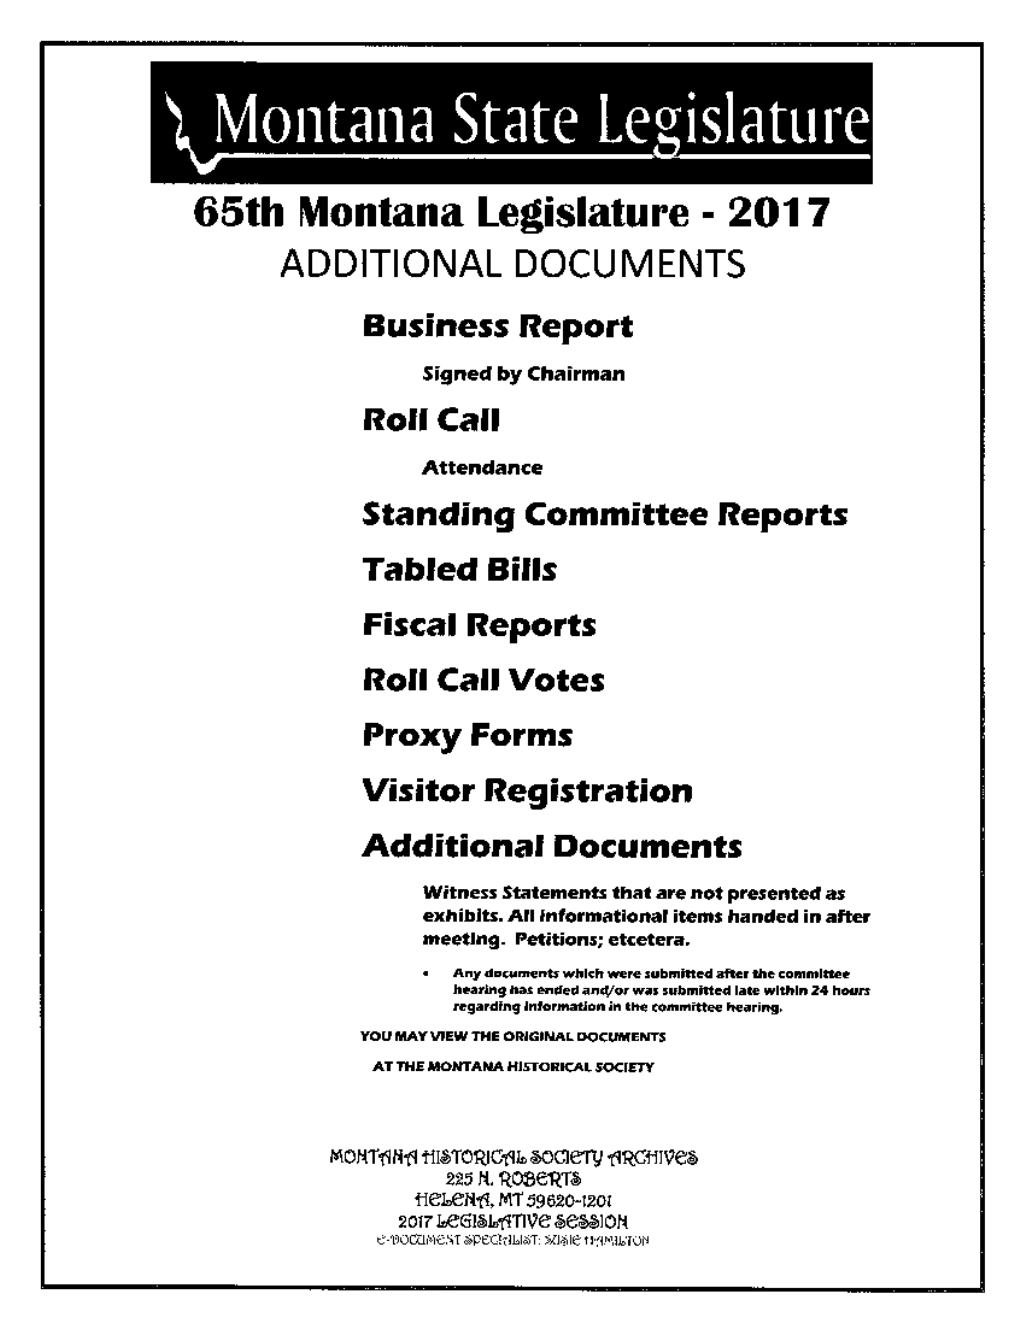 65Th Montana Legislature - 2017 ADDITIONAL DOCUMENTS Business Report Signe.L by Channan Roll €All